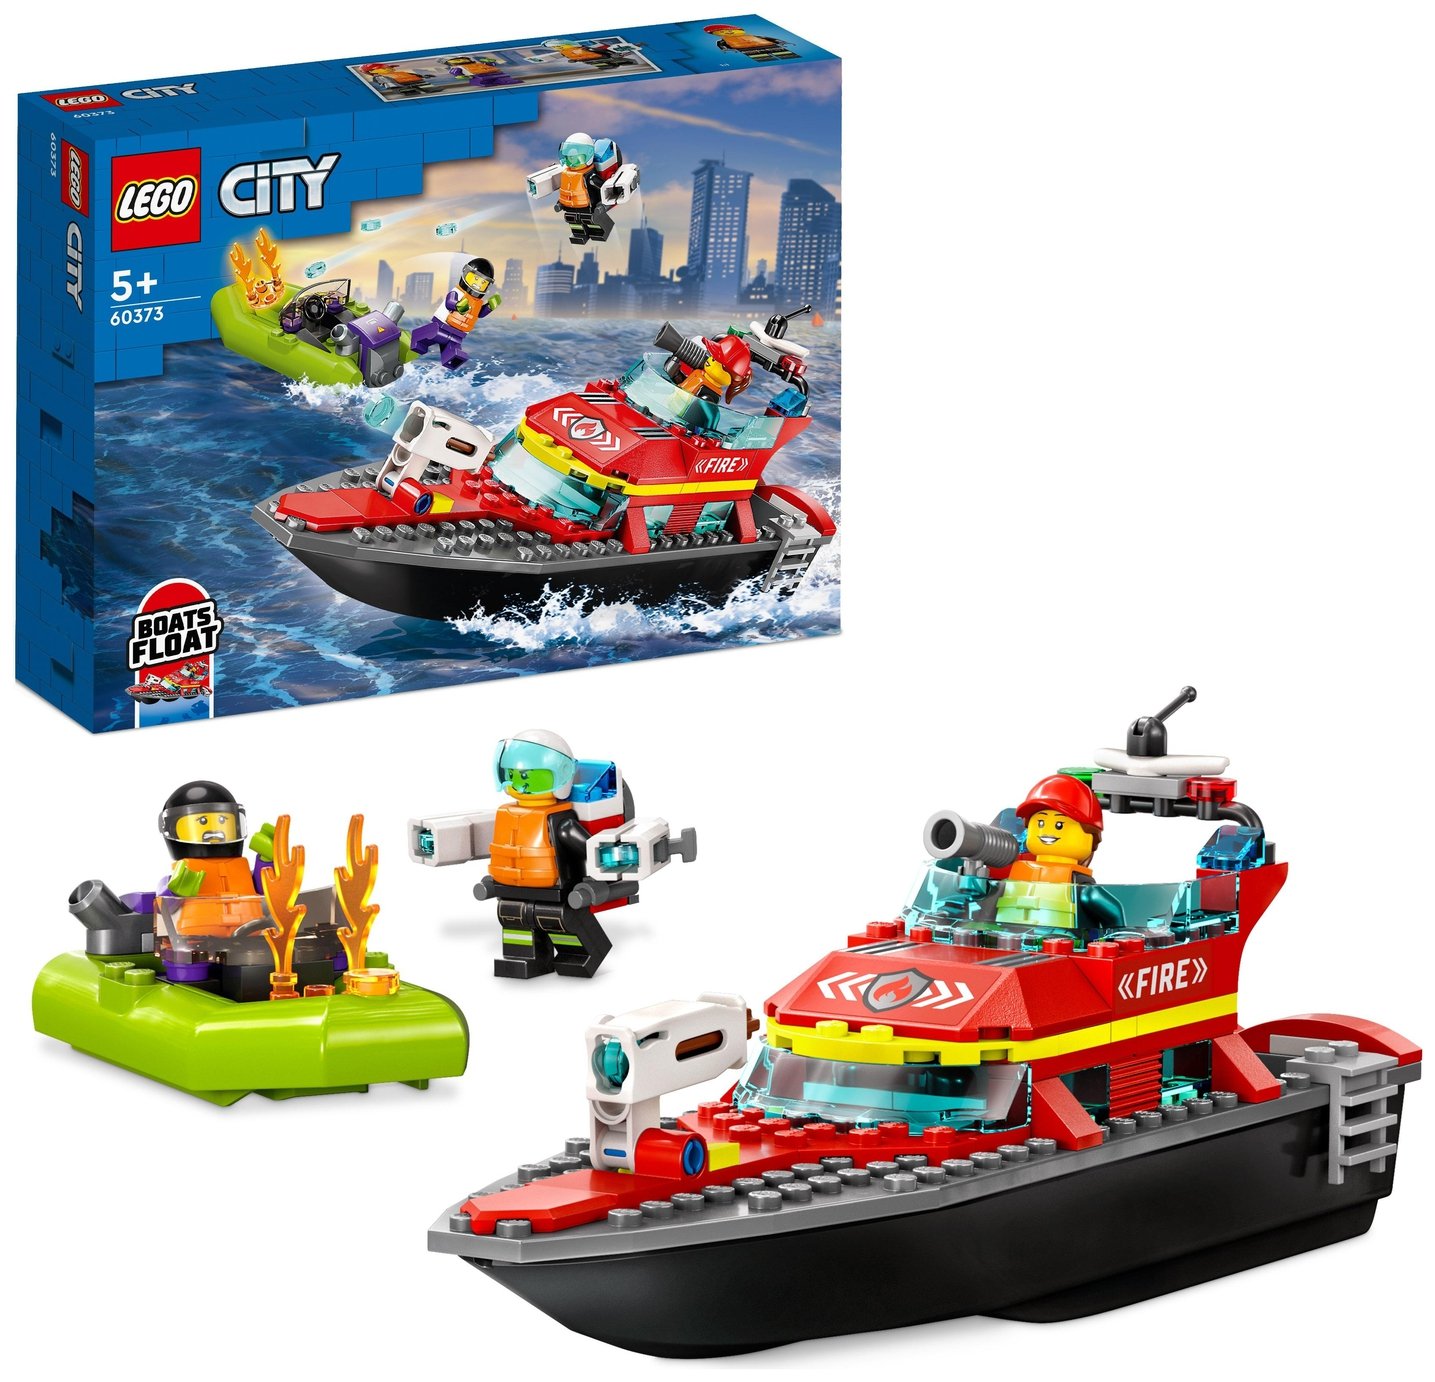 LEGO City Fire Rescue Boat Toy, Floats on Water Set 60373 review